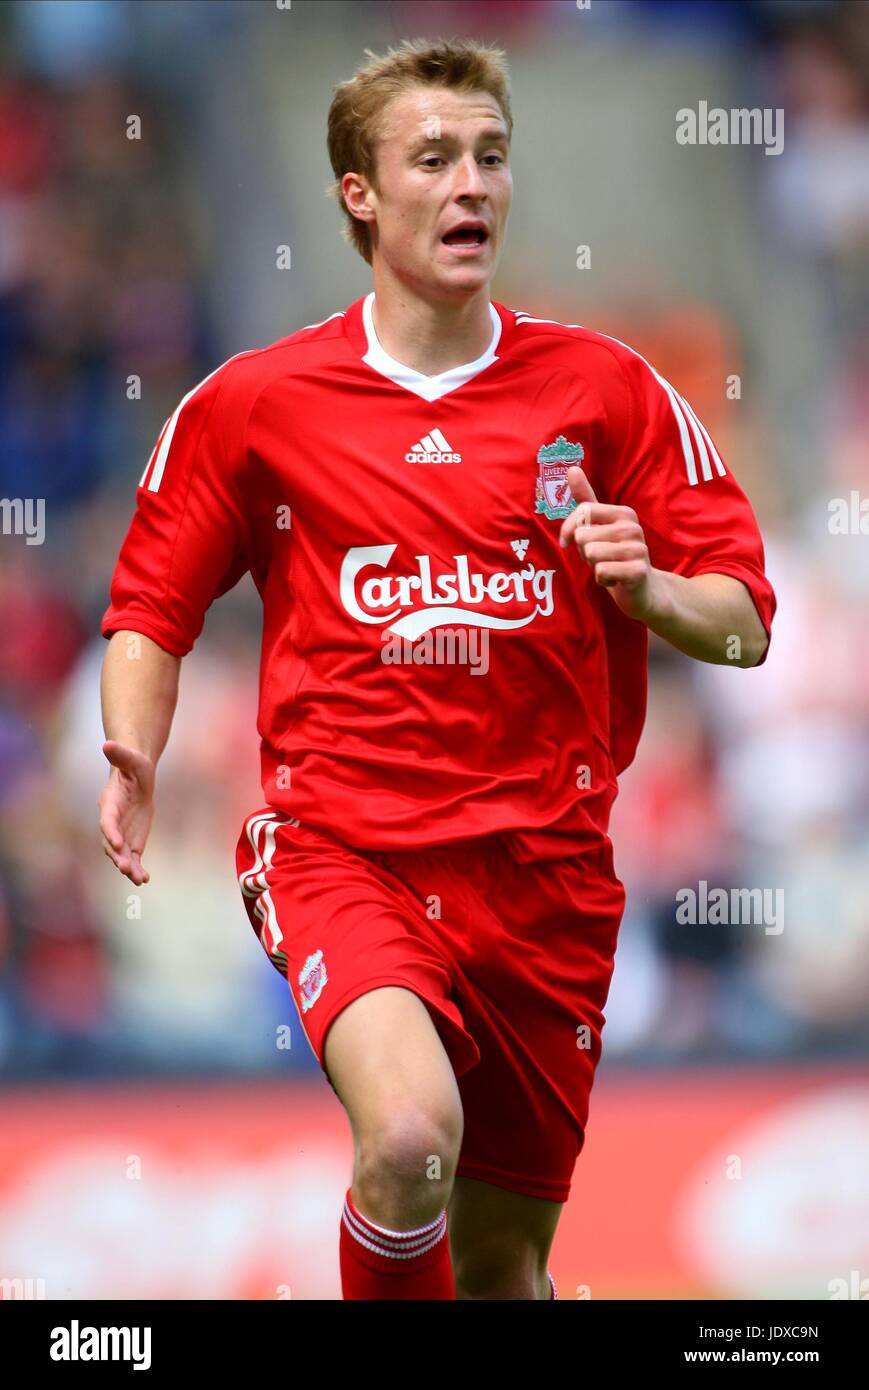 Stephen Darby Stock Photos & Stephen Darby Stock Images ...